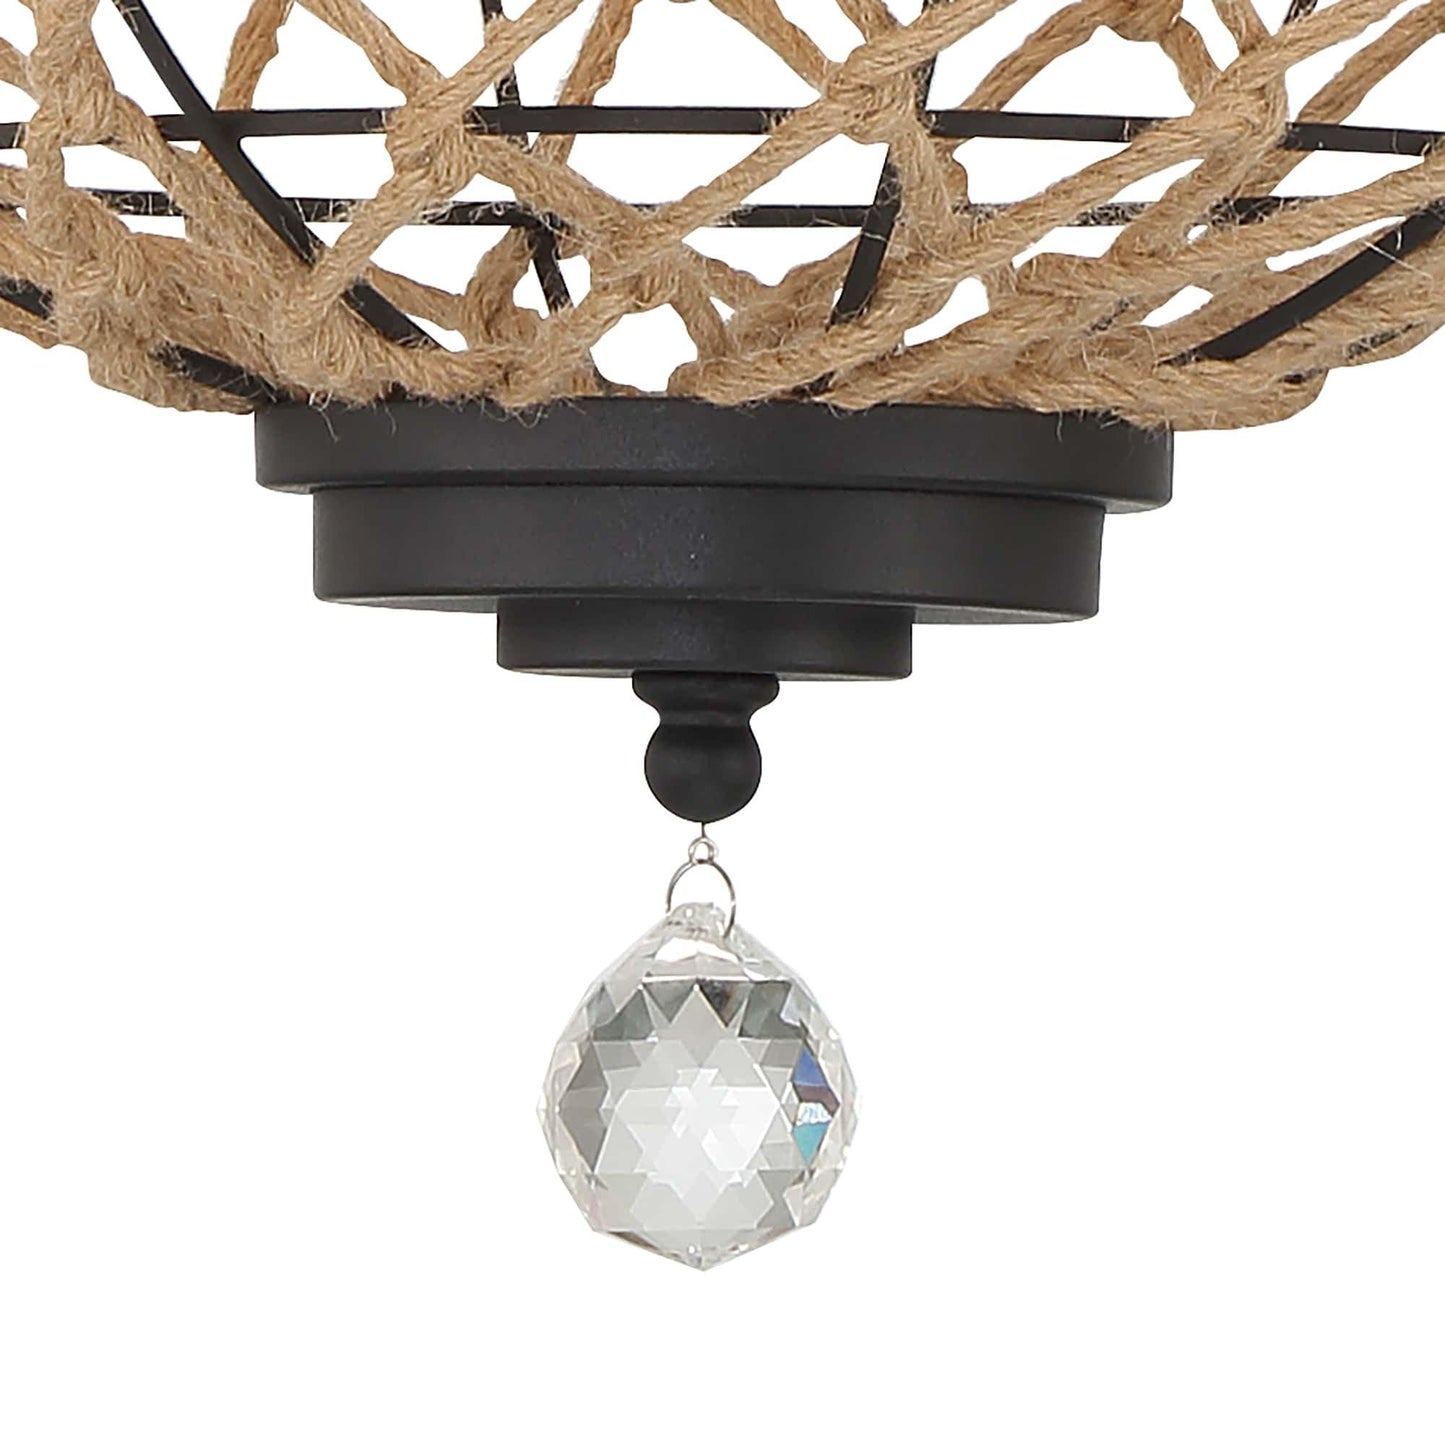 5 light sphere globe chandelier with rope accents (6) by ACROMA